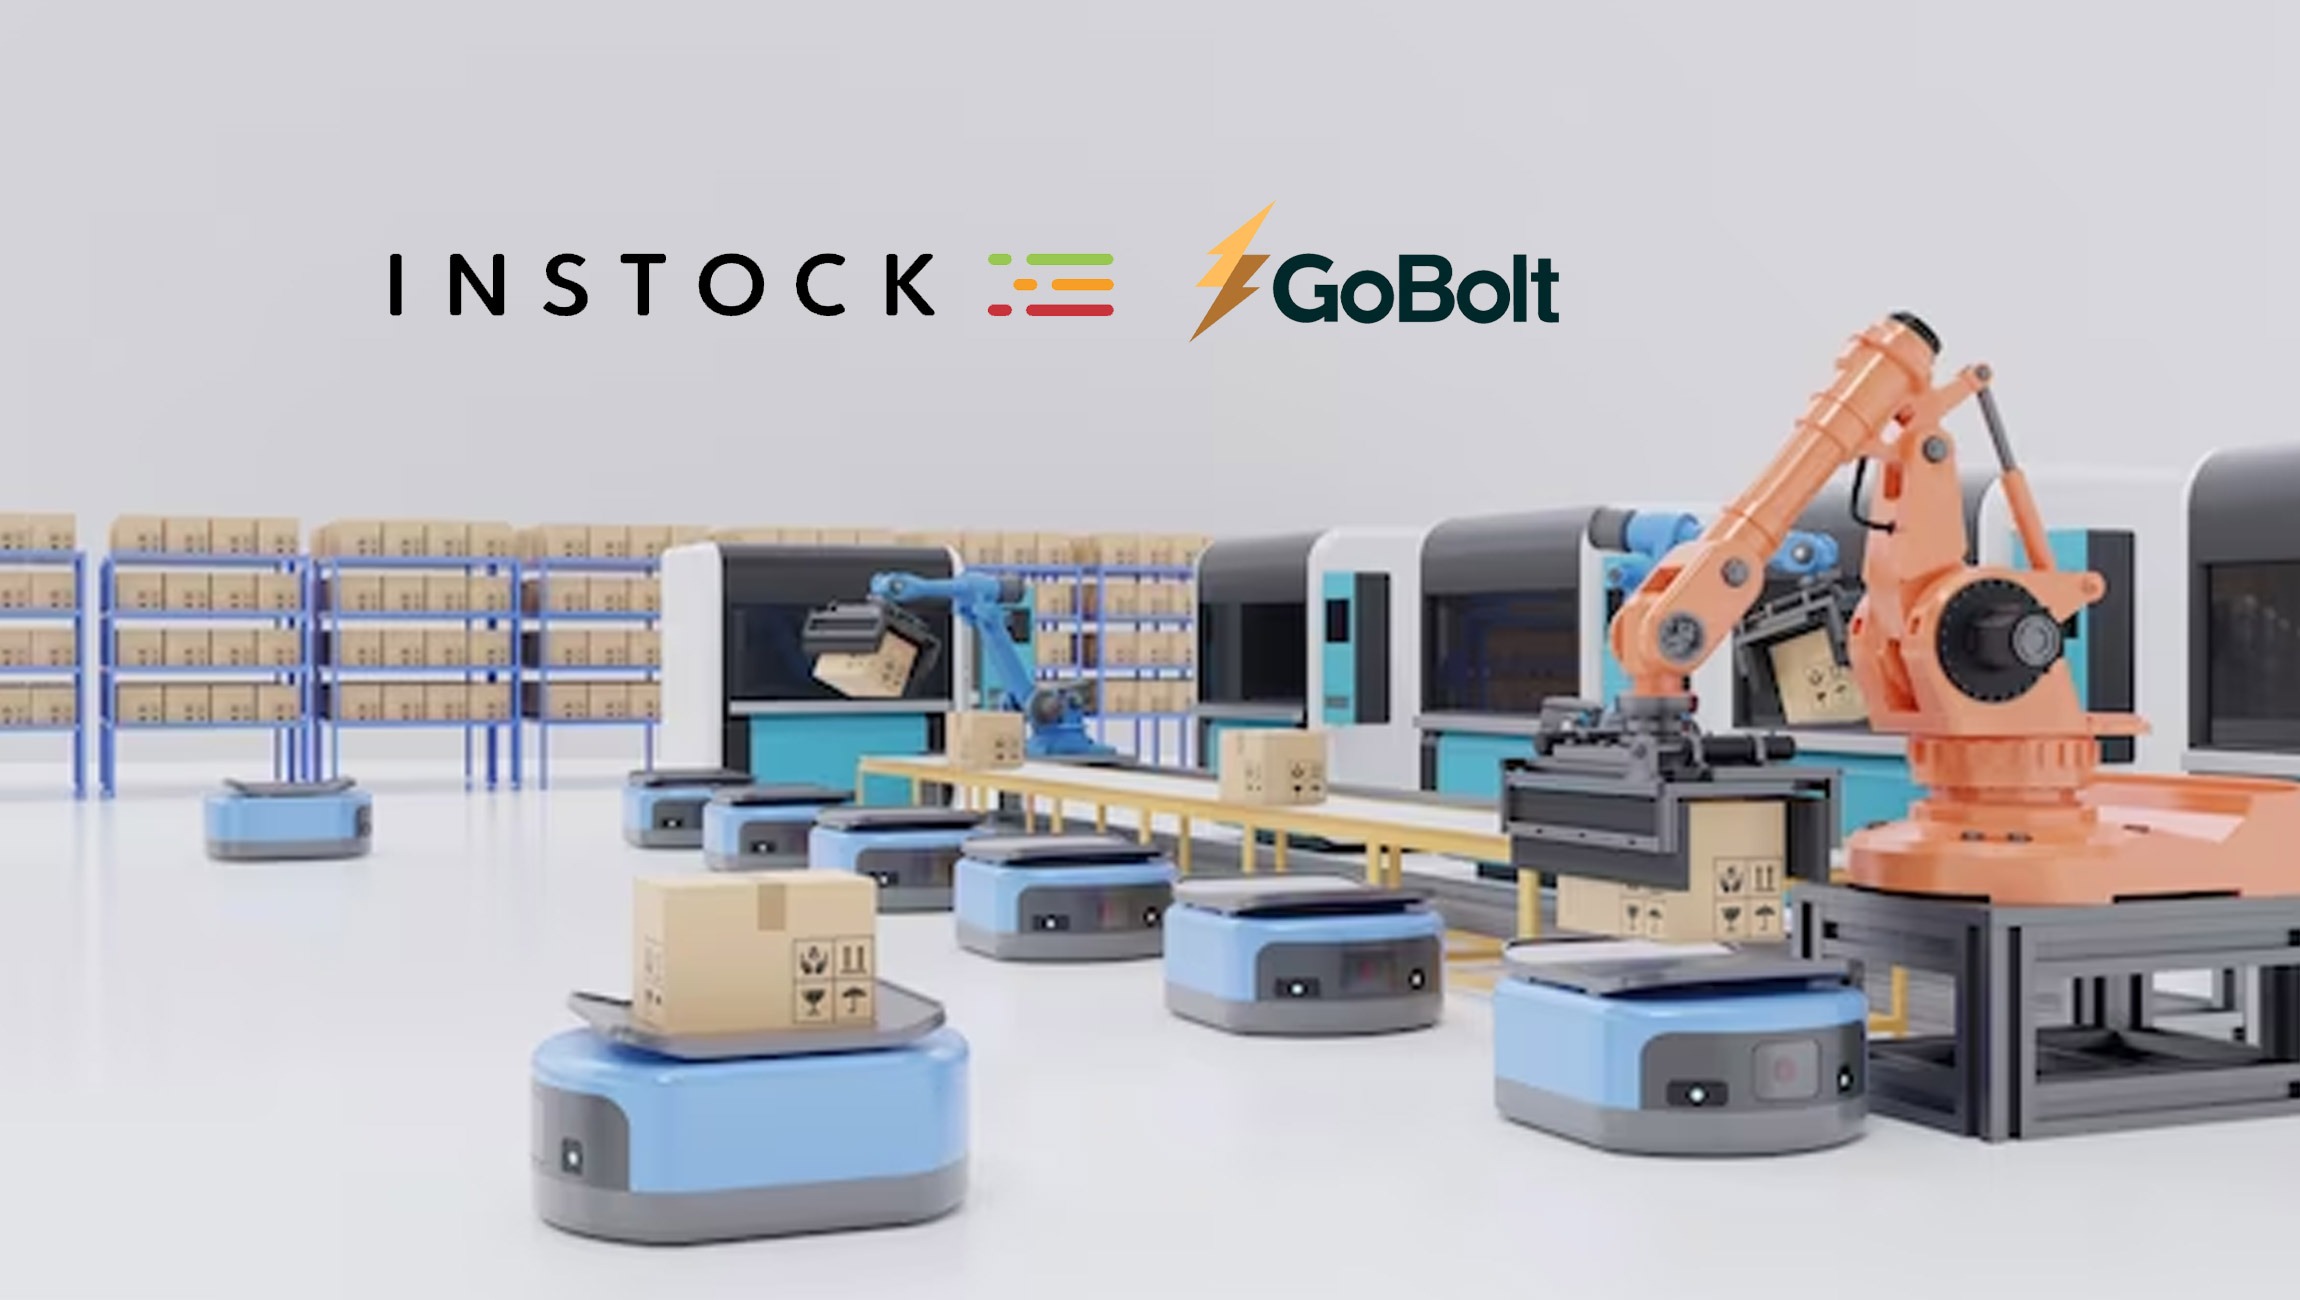 Instock-Launches-Gravity-Defying-Robotics-Automation-With-GoBolt